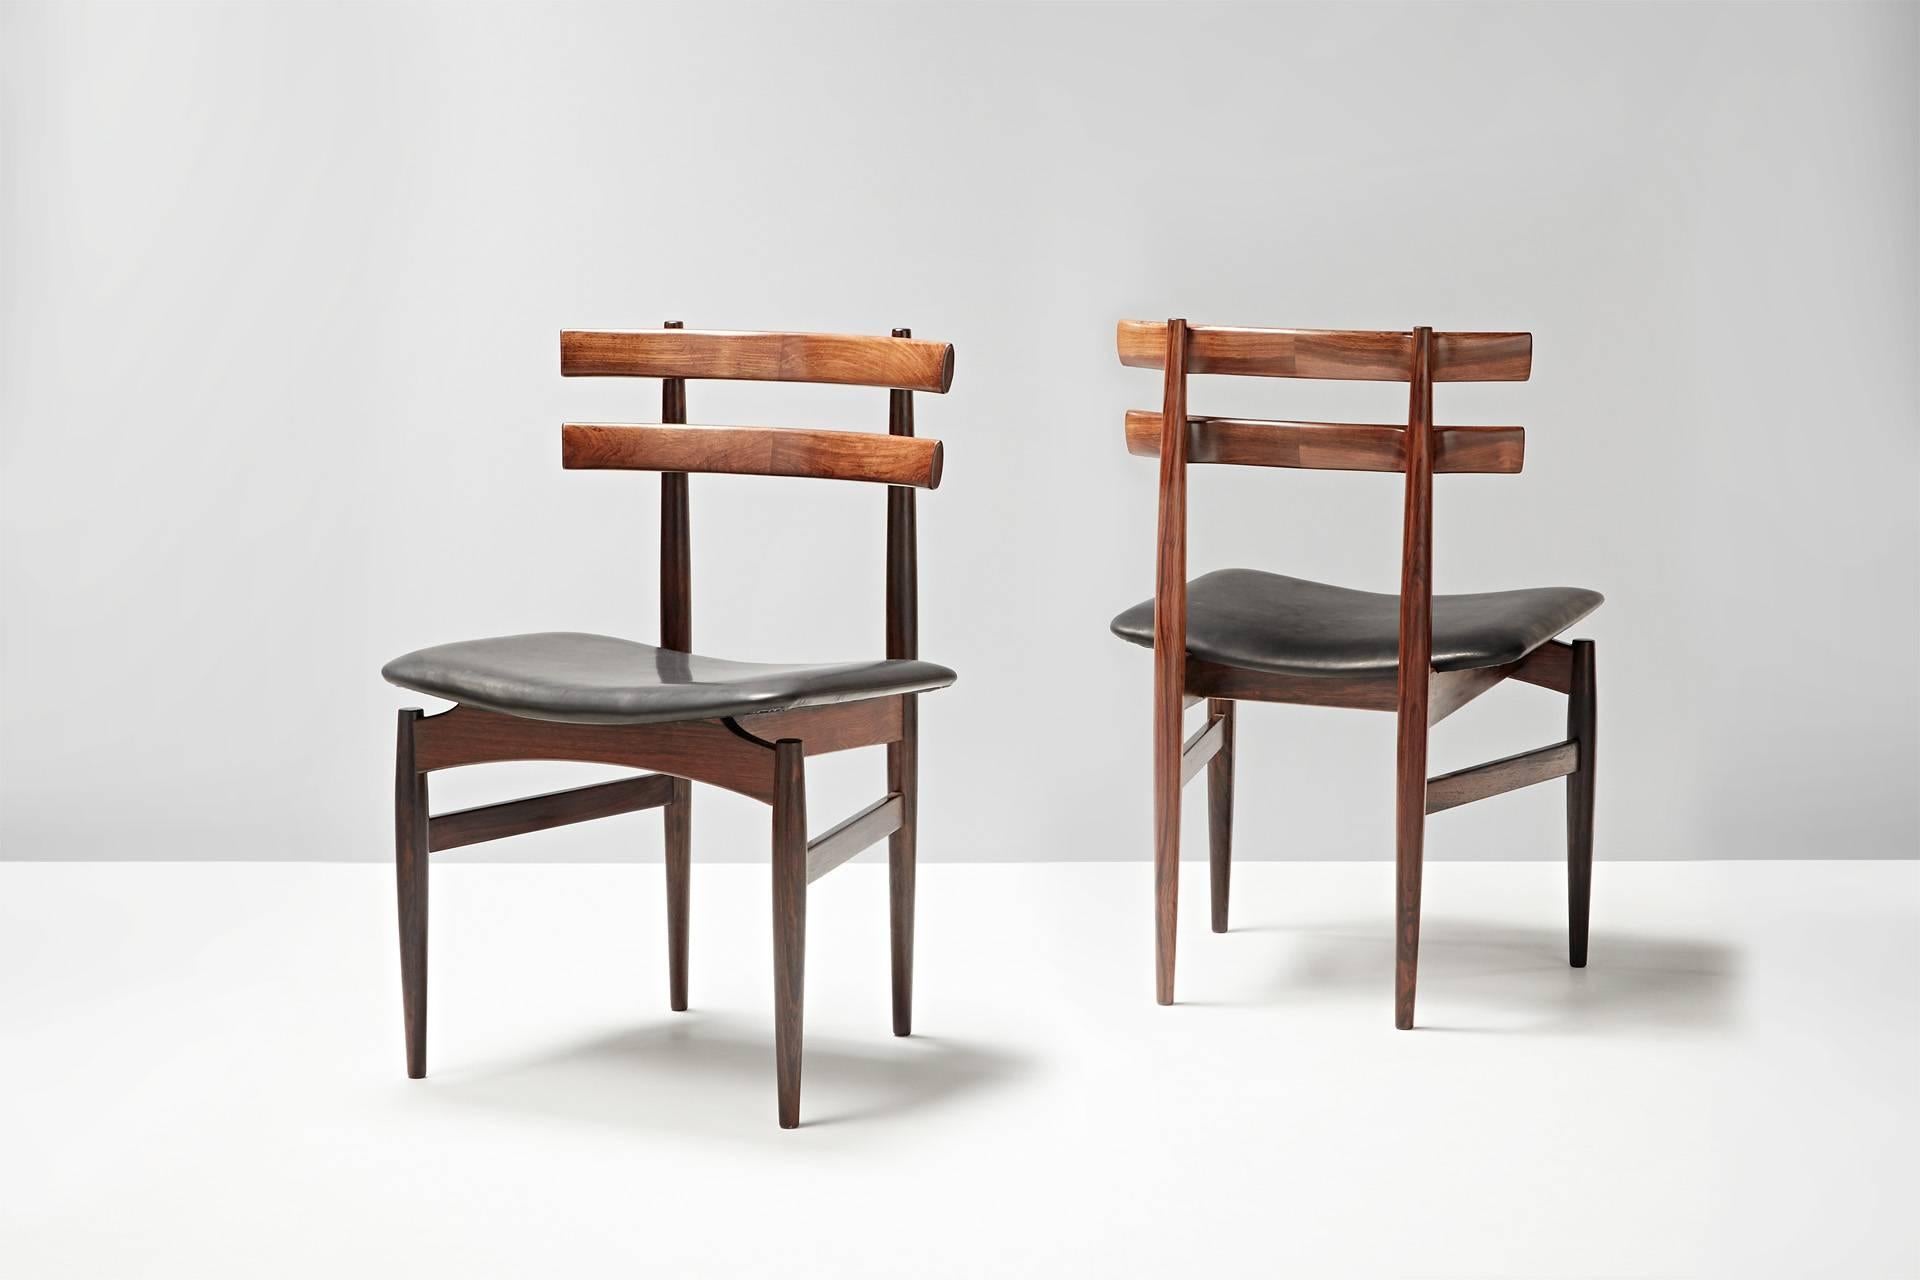 Set of six rosewood dining chairs by Poul Hundevad. Seats newly covered in aniline black leather.